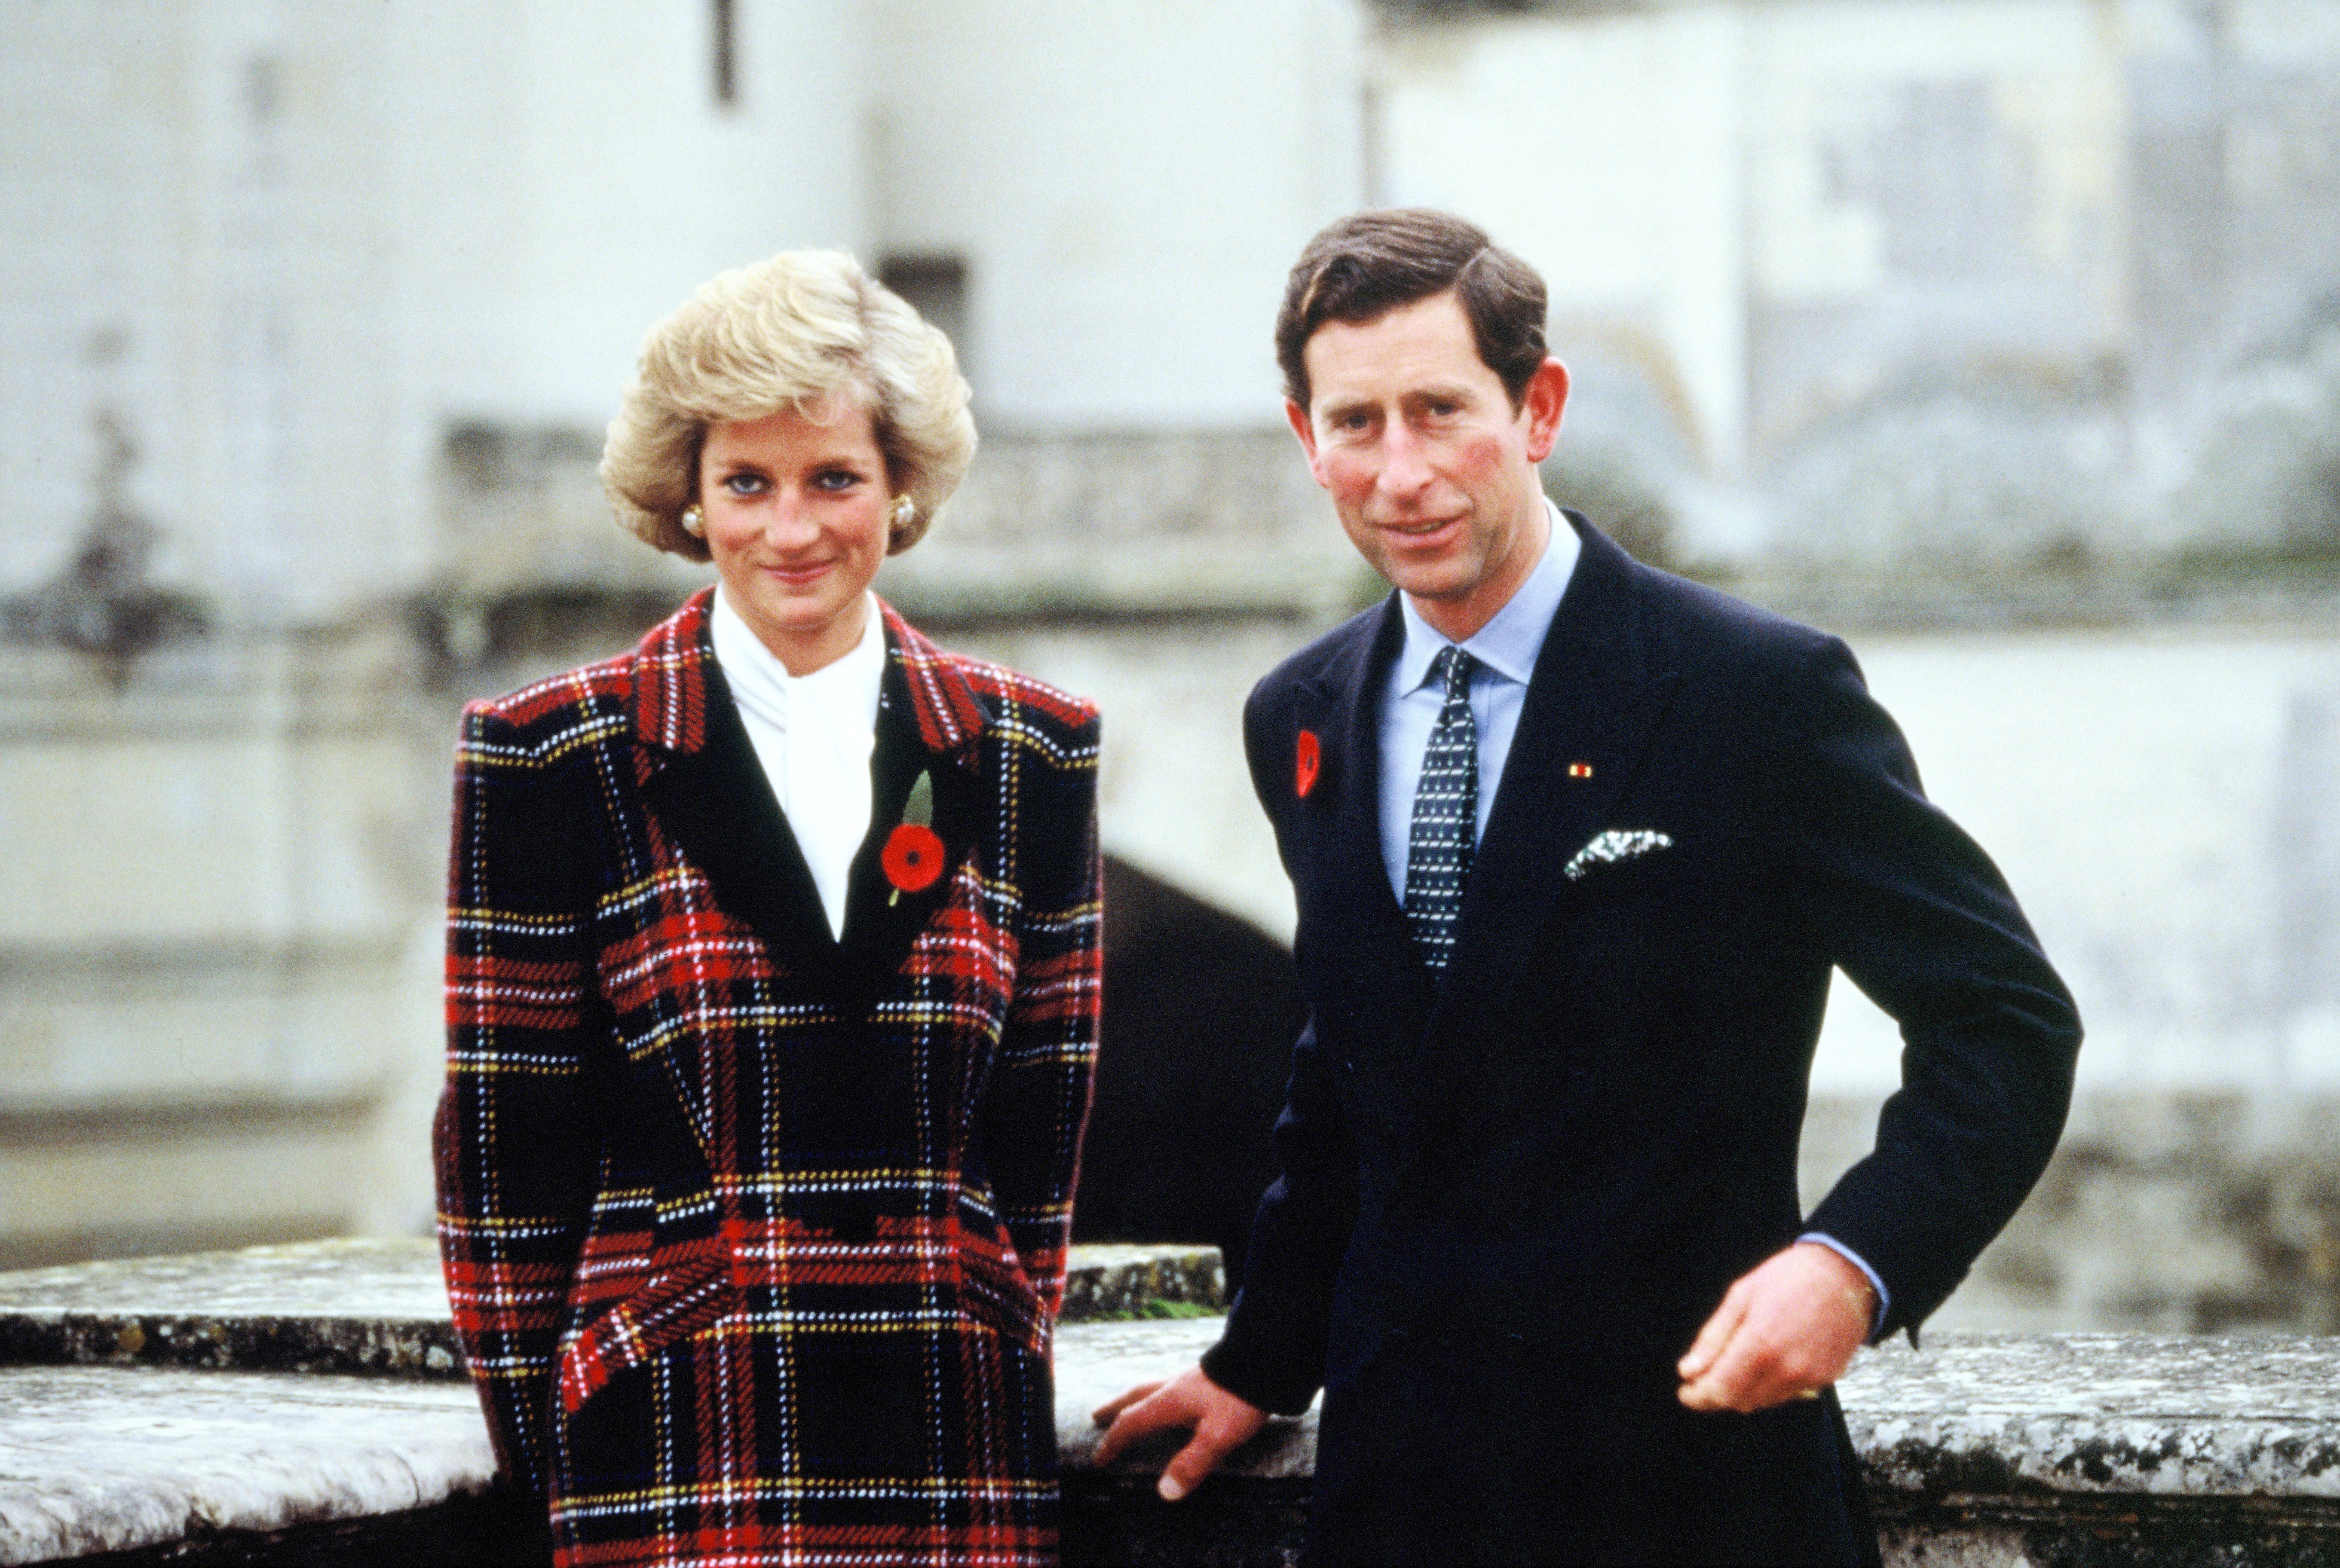 Prince Charles and Princess Diana pose outside Chateau de Chambord during their official visit to France on November 9, 1988, in Chambord, France | Source: Getty Images